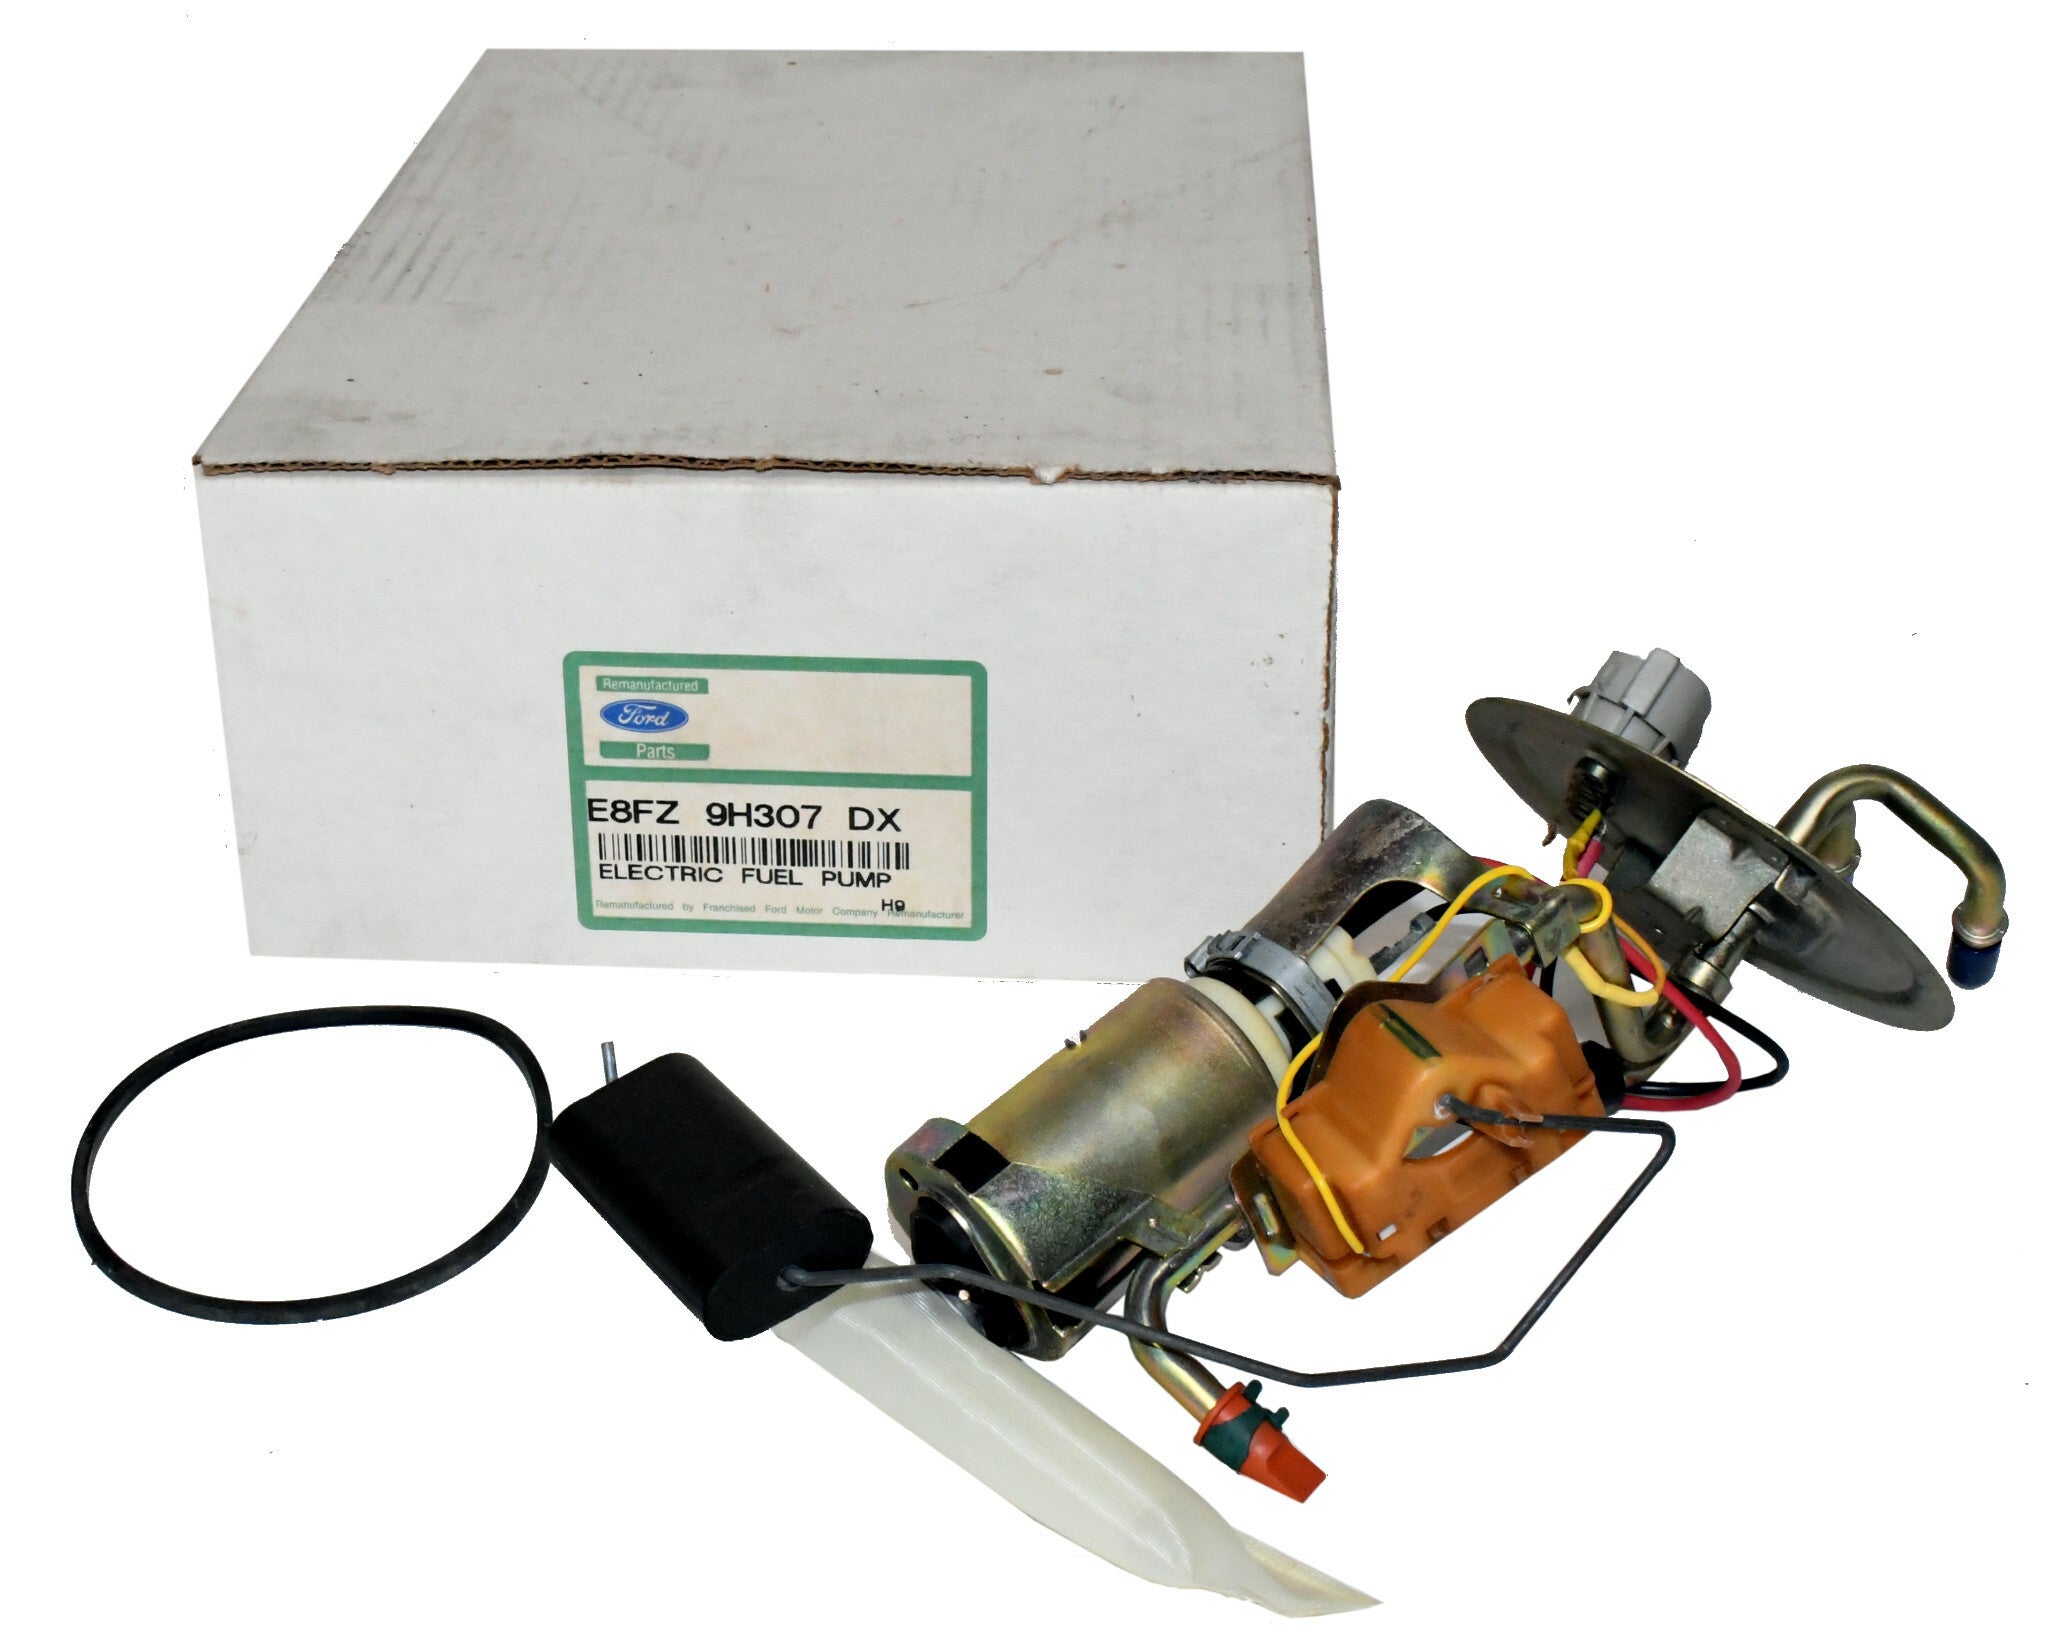 Remanufactured fuel pump, sender assembly for 1987-1990 Escort, Lynx from Ford E8FZ-9H307-DX